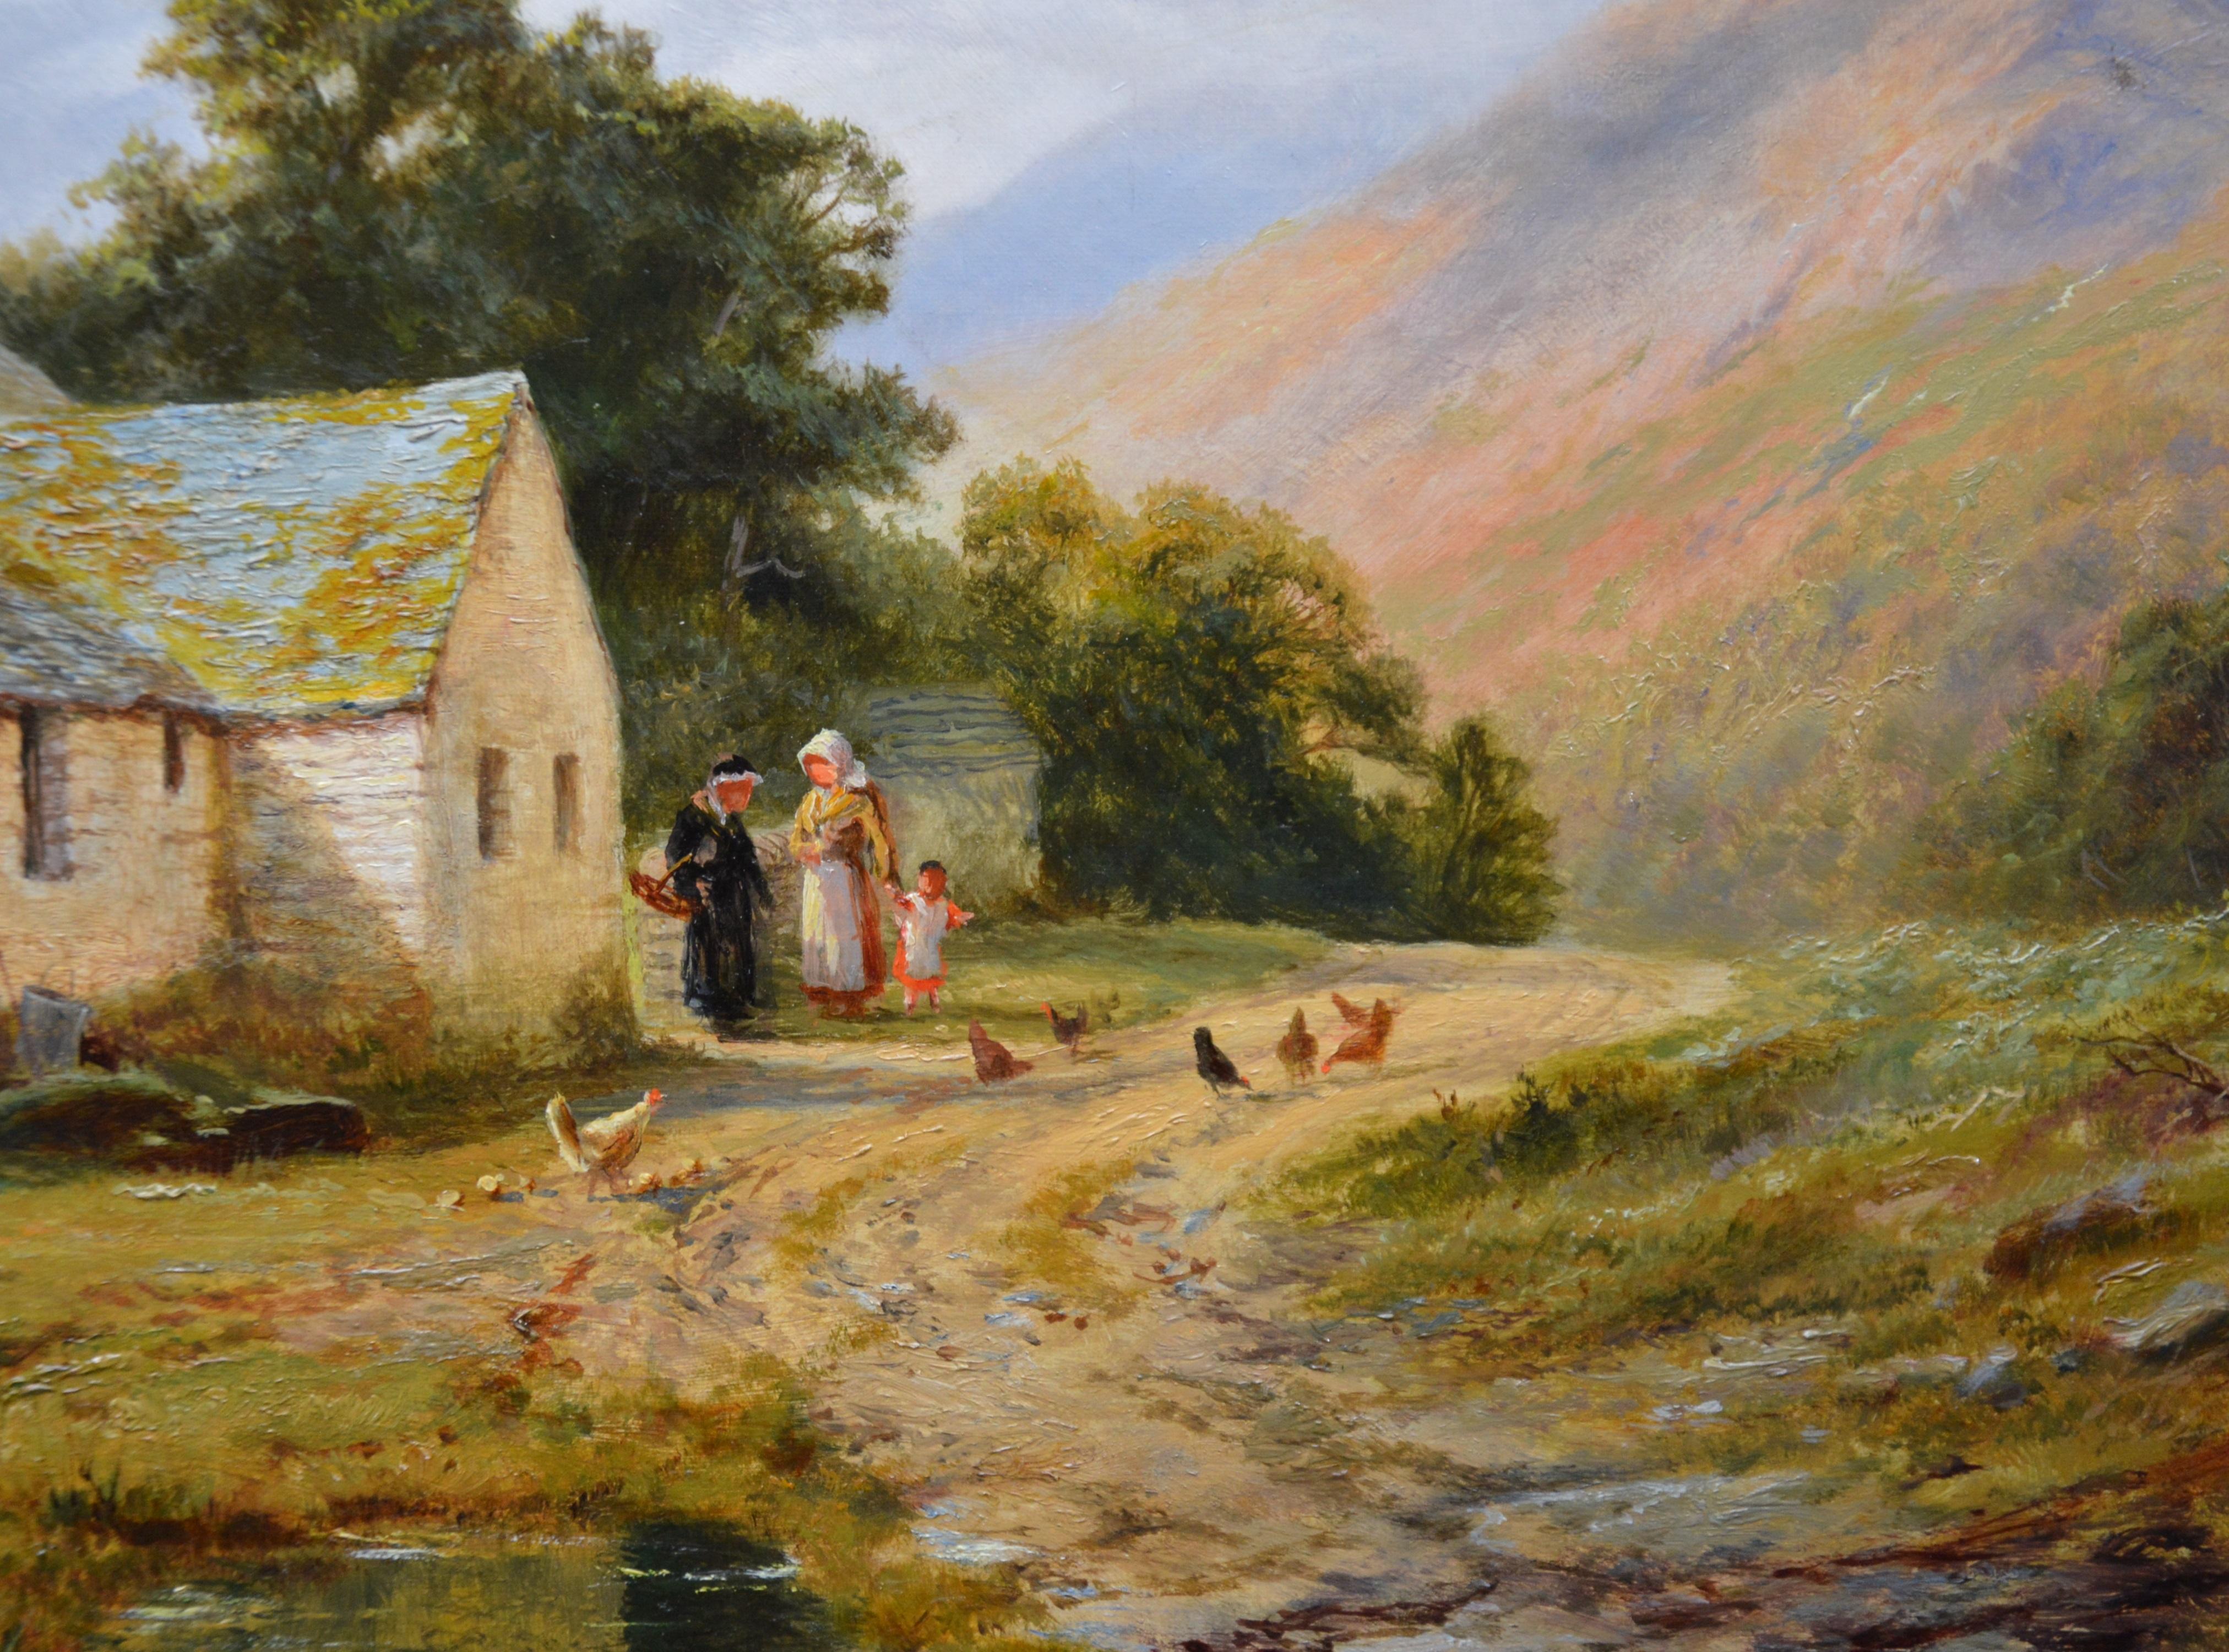 The Lledr Valley - 19th Century Summer Landscape Oil Painting of Snowdonia Wales 2